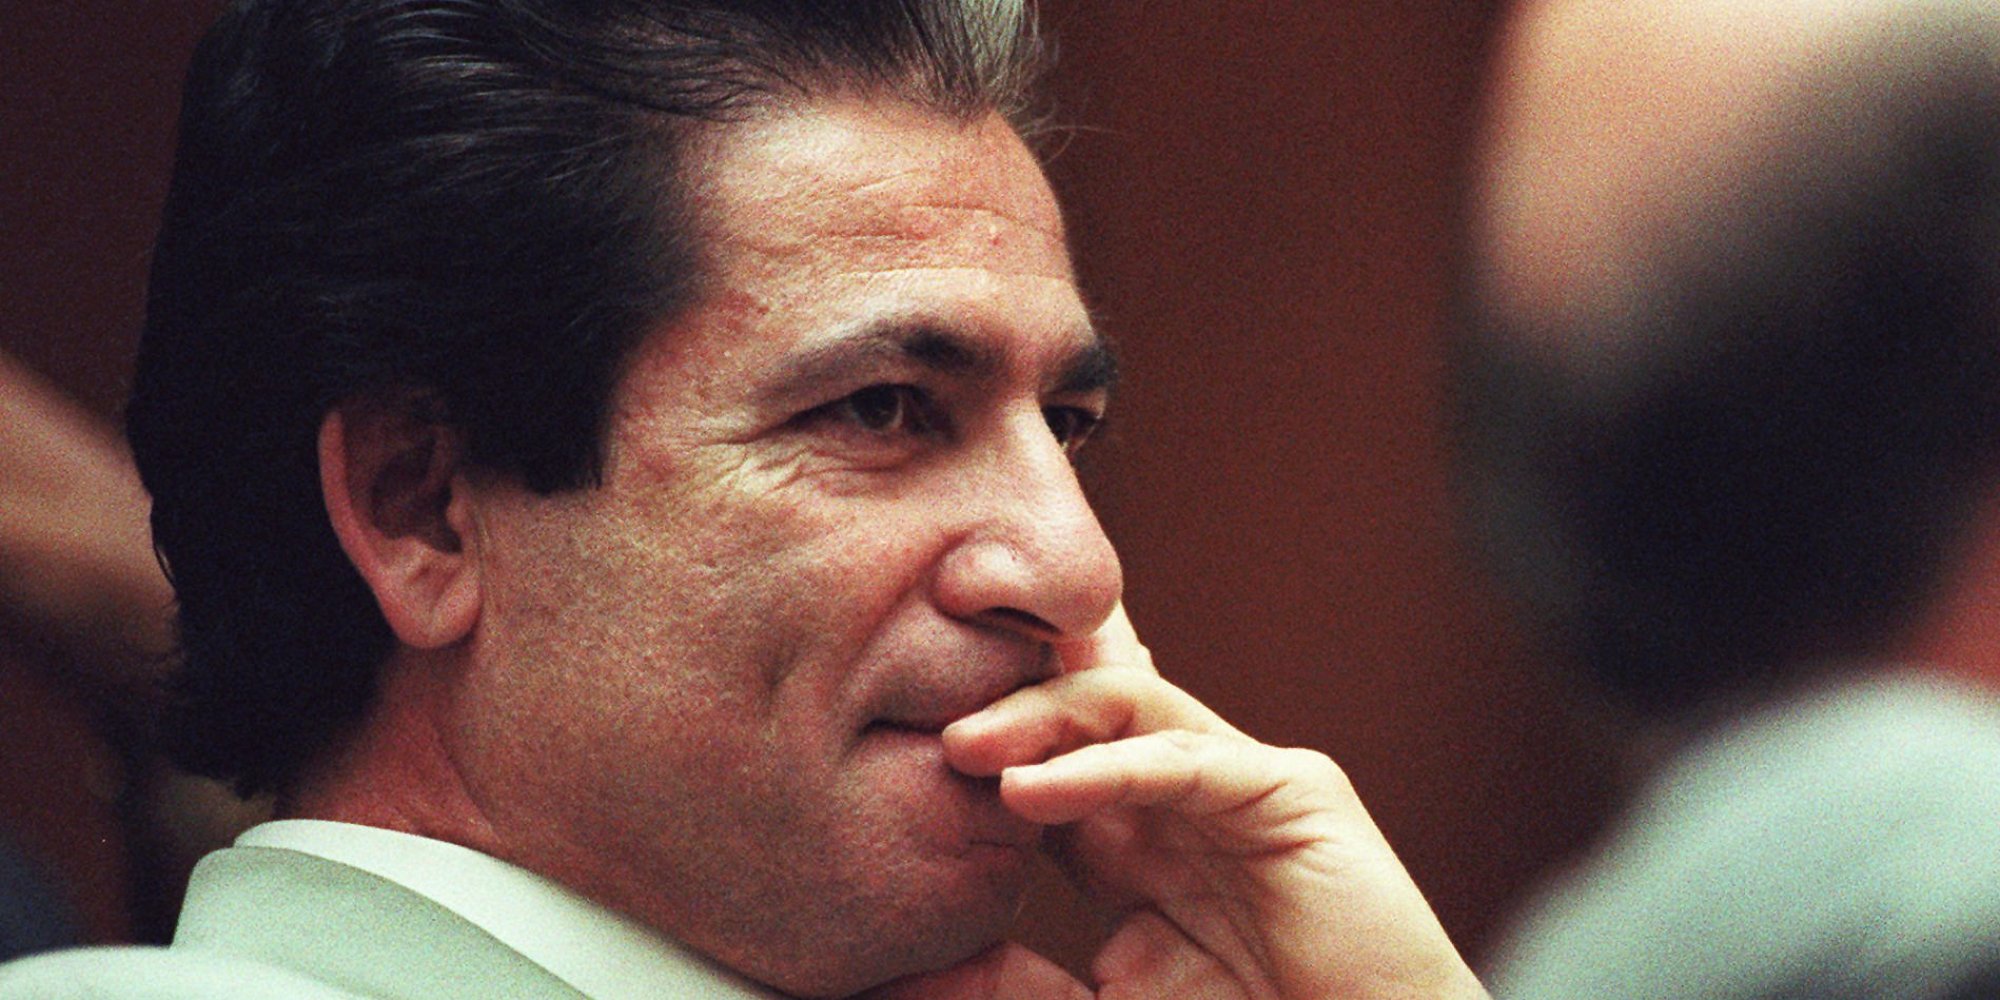 Fred Goldman, father of Ron Goldman, informed the Daily Mail of a startling tidbit over 20 years following the case. Robert Kardashian, OJ's friend and one of his defense attorneys, was seen leaving the Juice's home the morning after the murders carrying a briefcase. It is assumed this case may have held damning evidence.